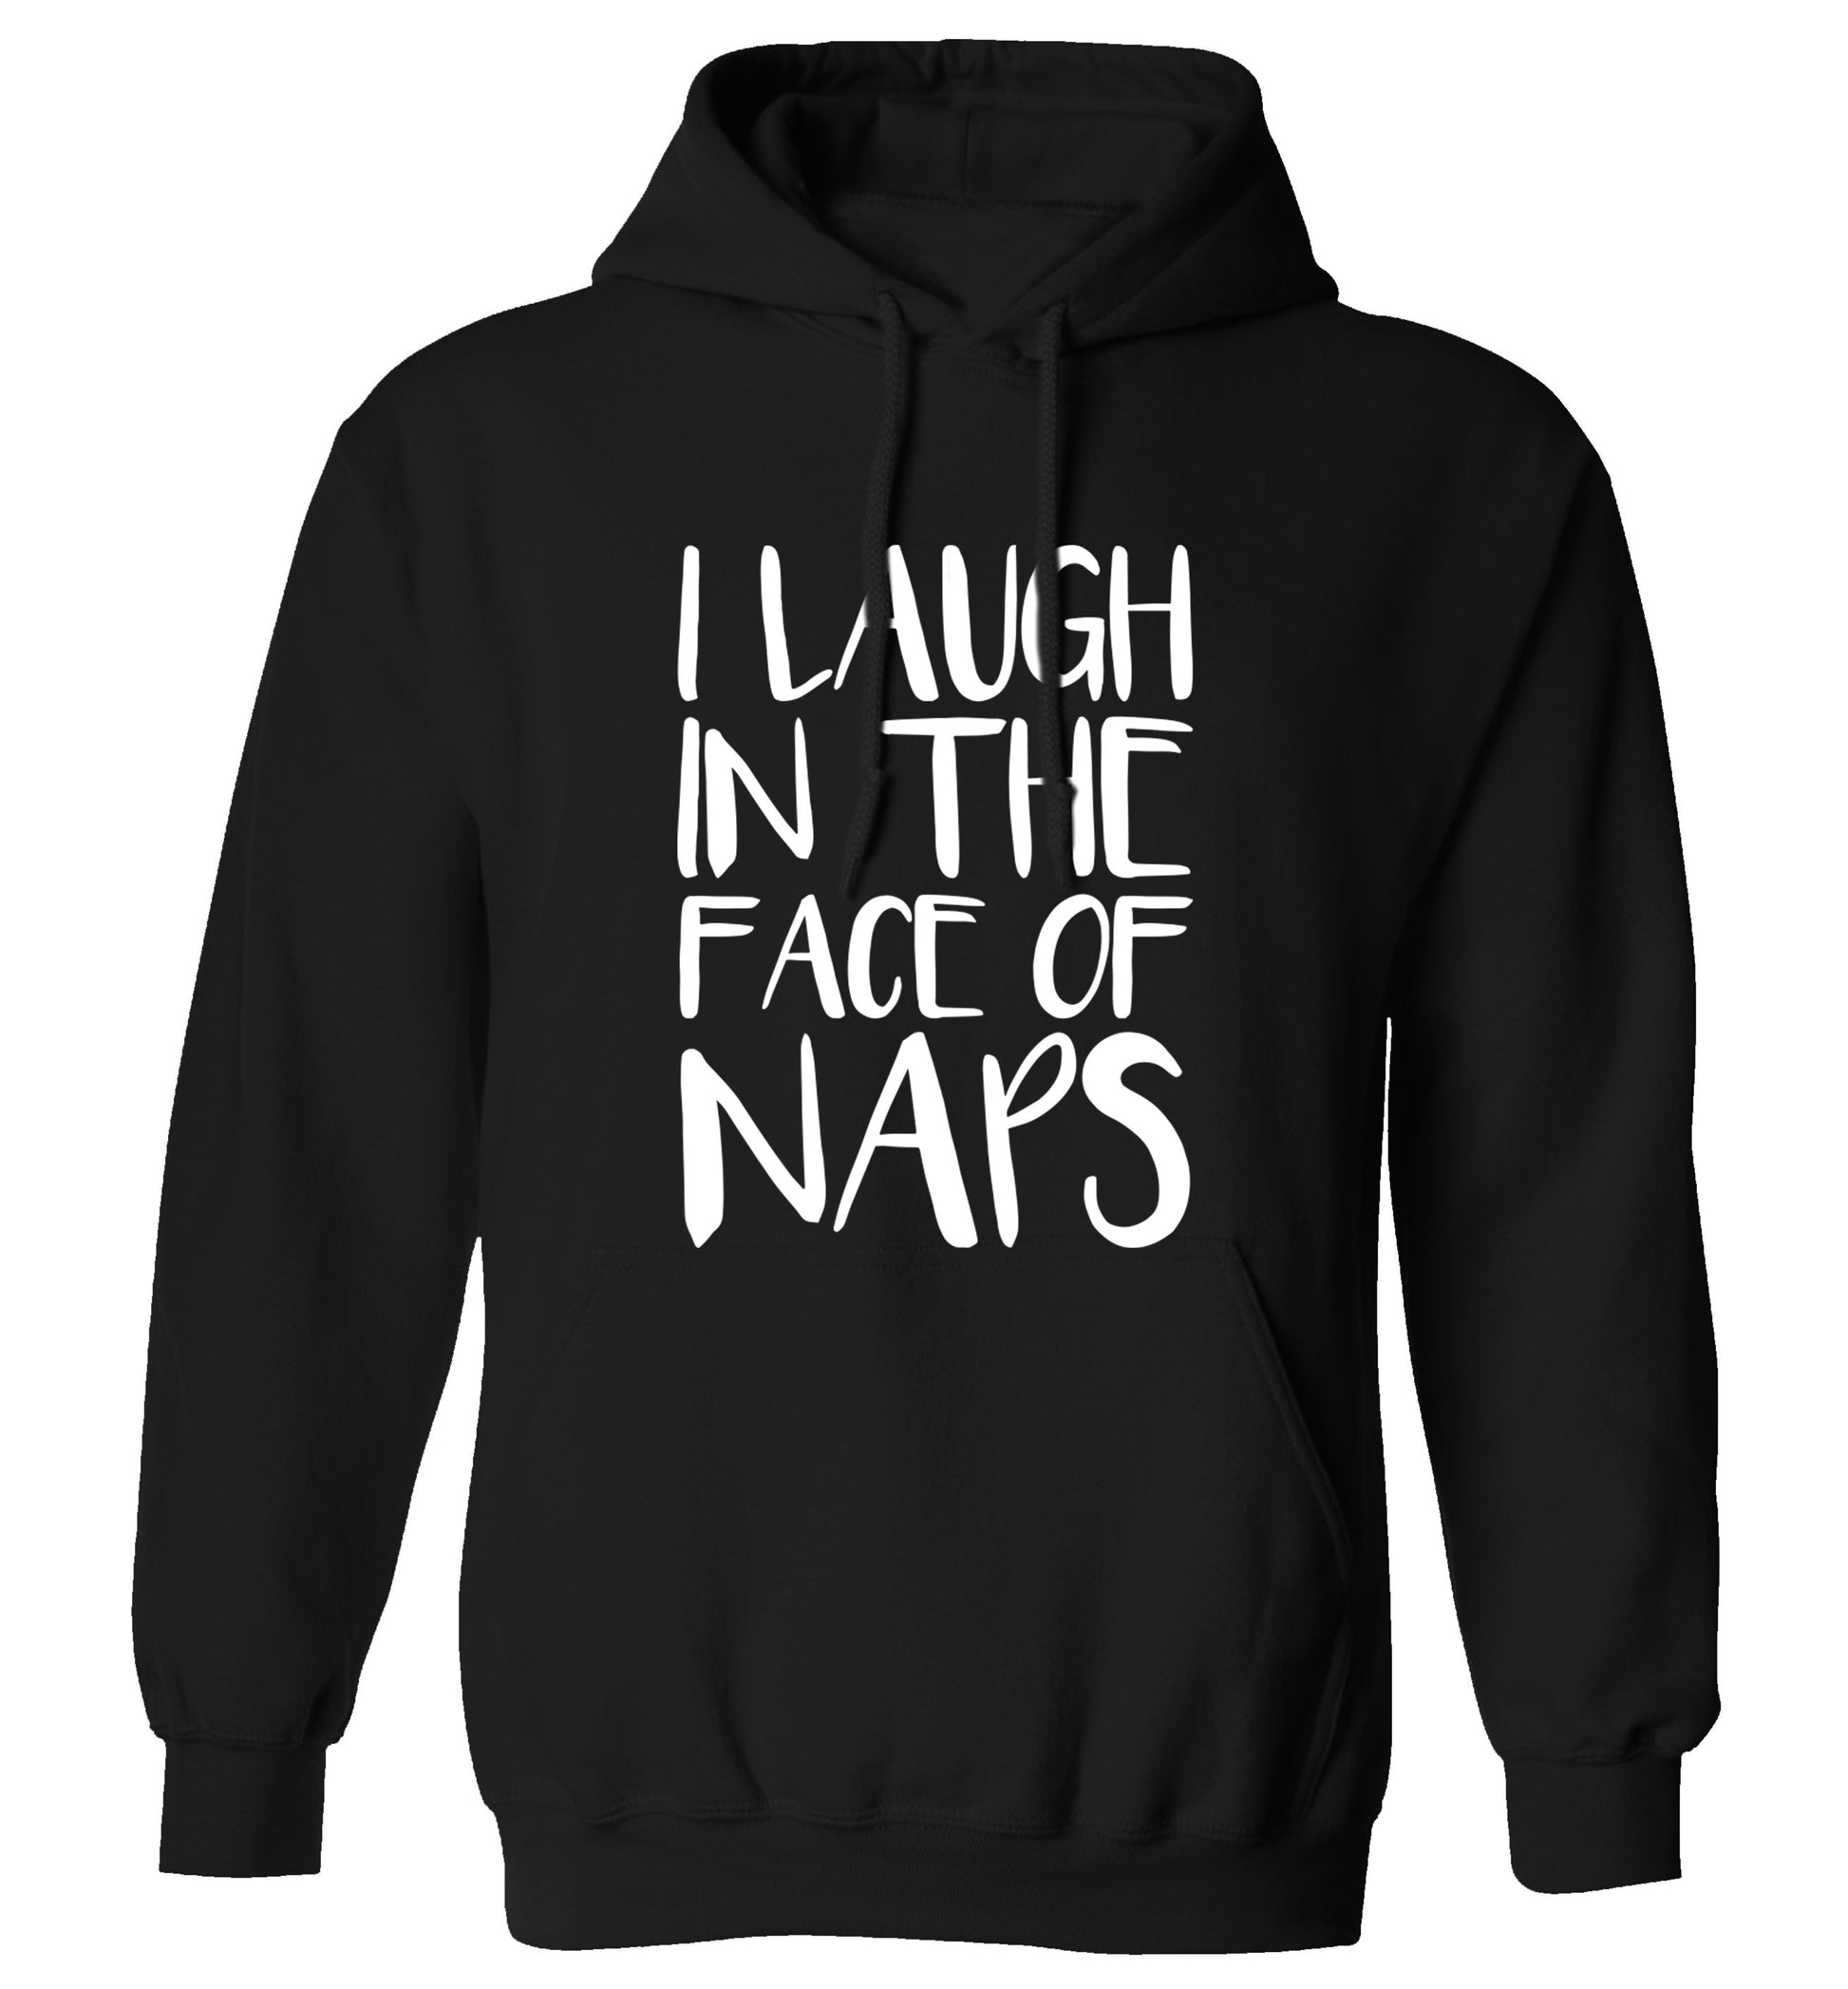 I laugh in the face of naps adults unisex black hoodie 2XL